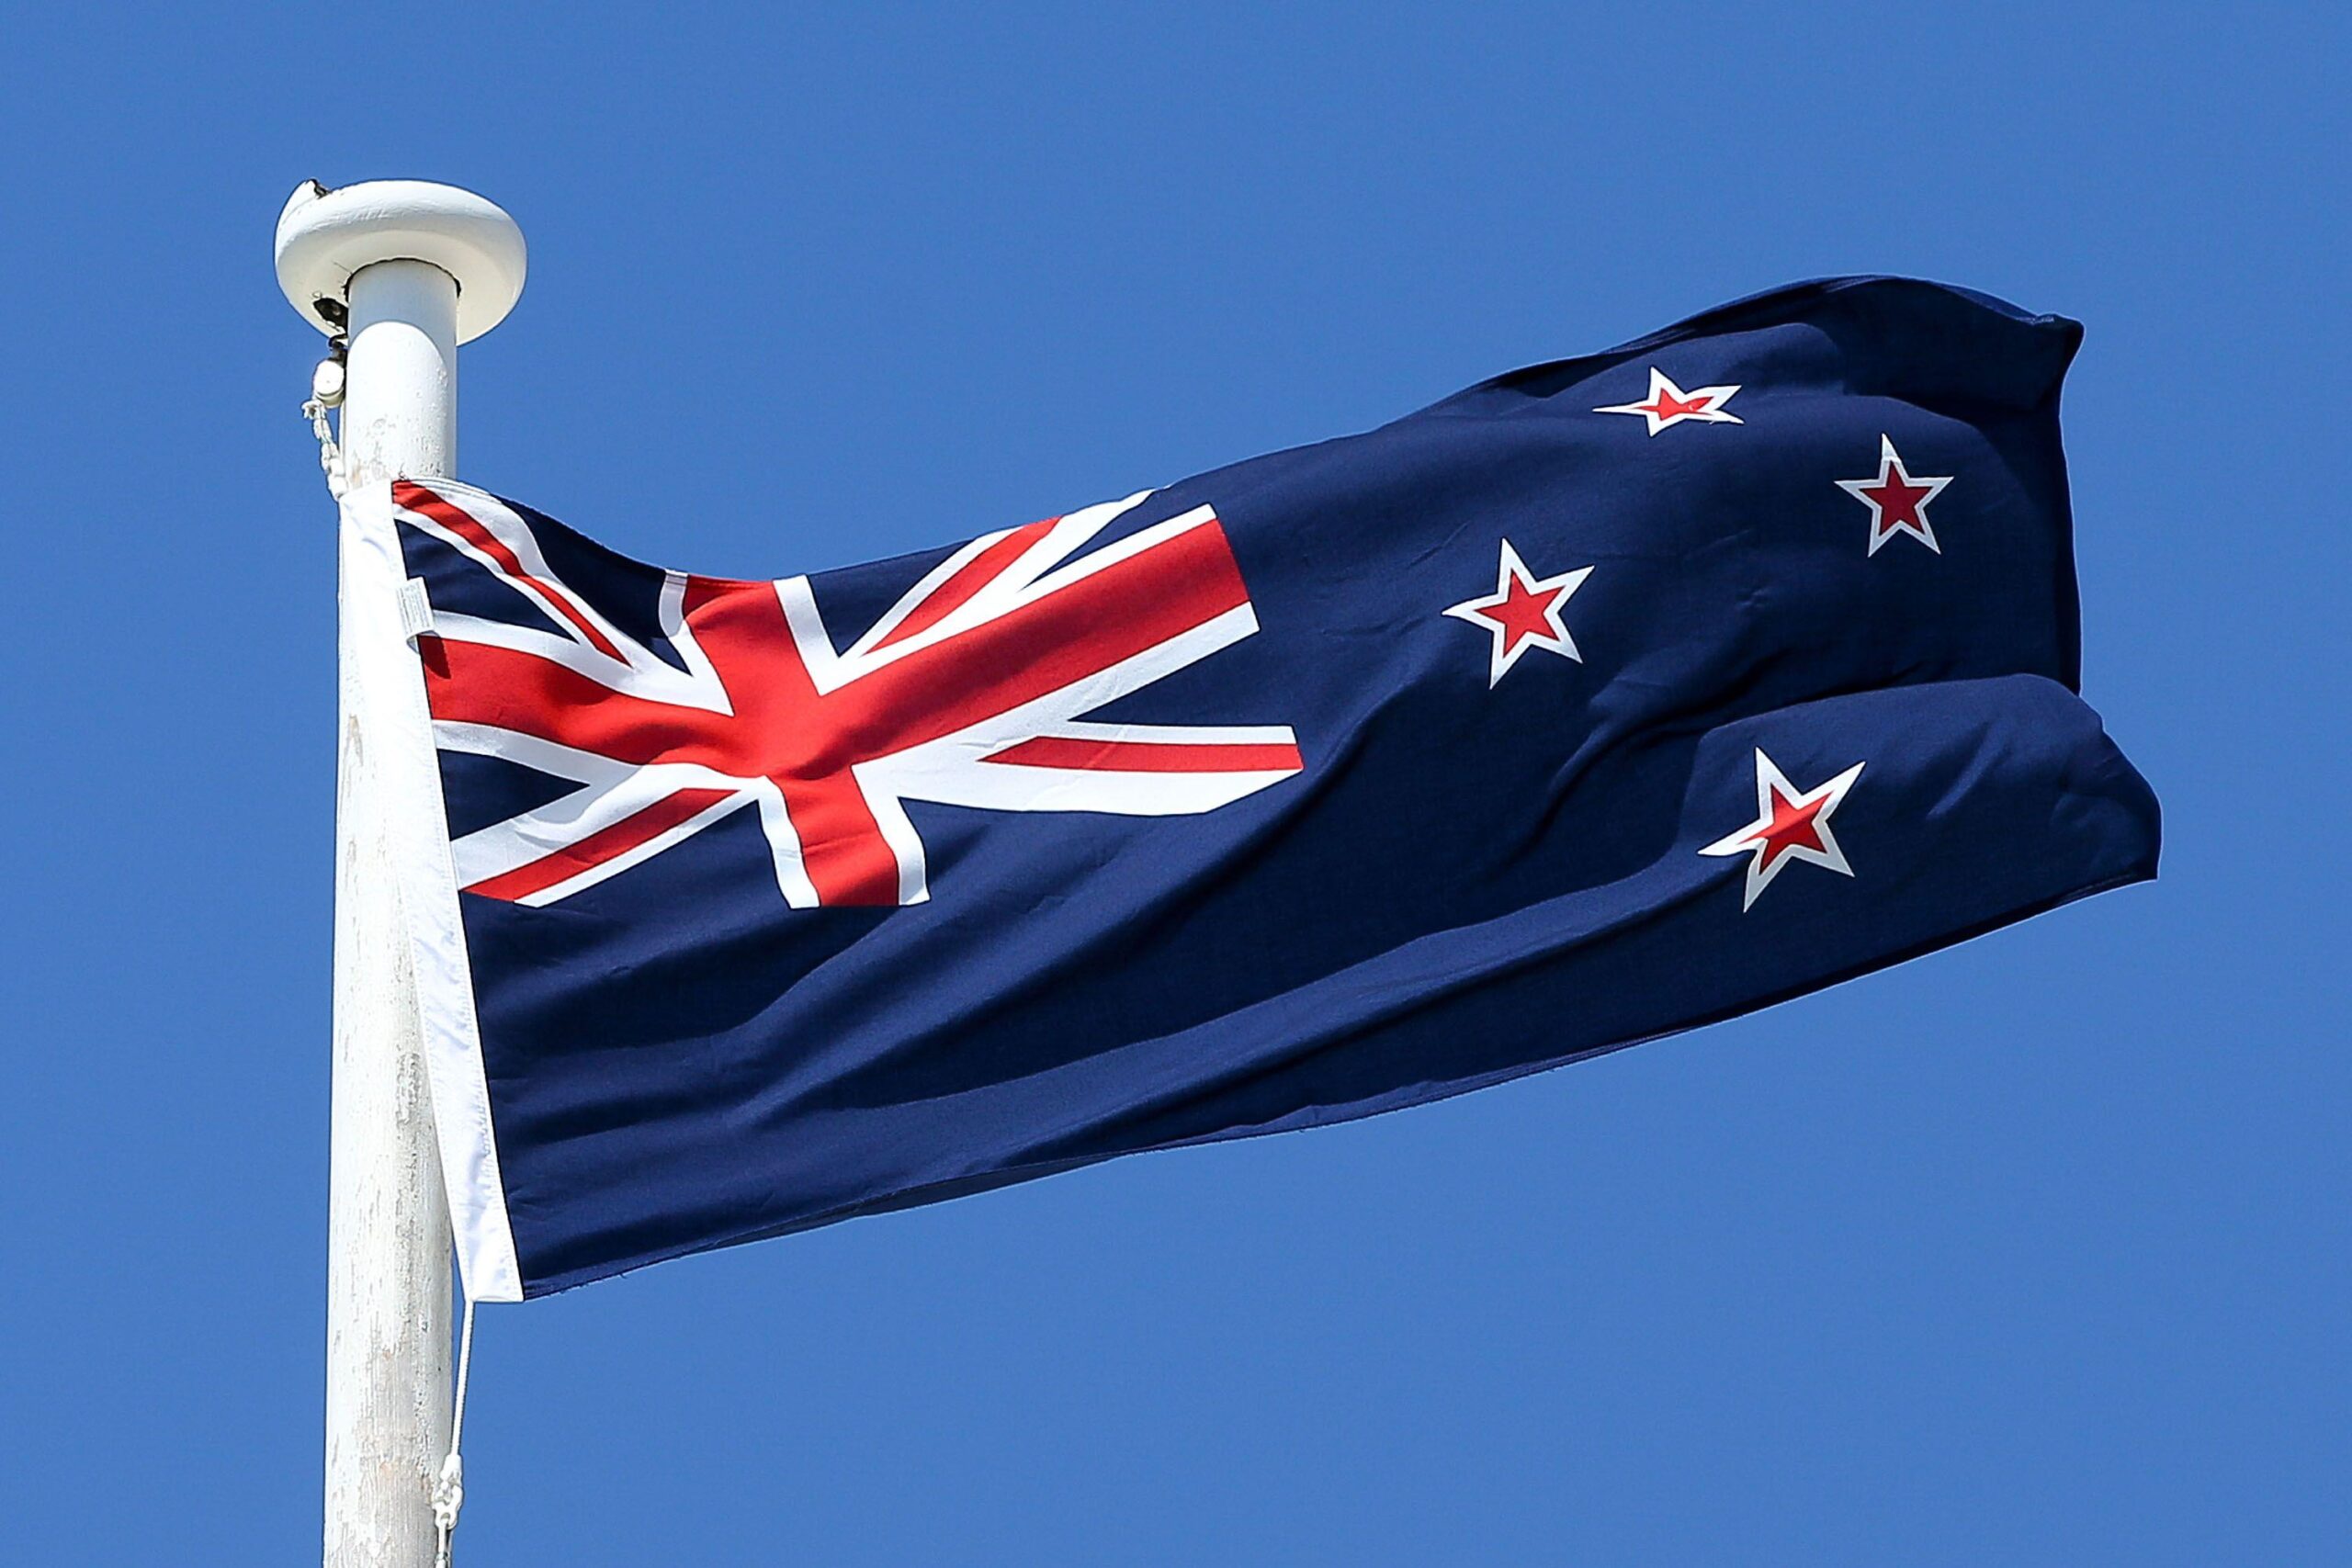 Newzealand National Flag Waving In Wind 2K Wallpapers Download